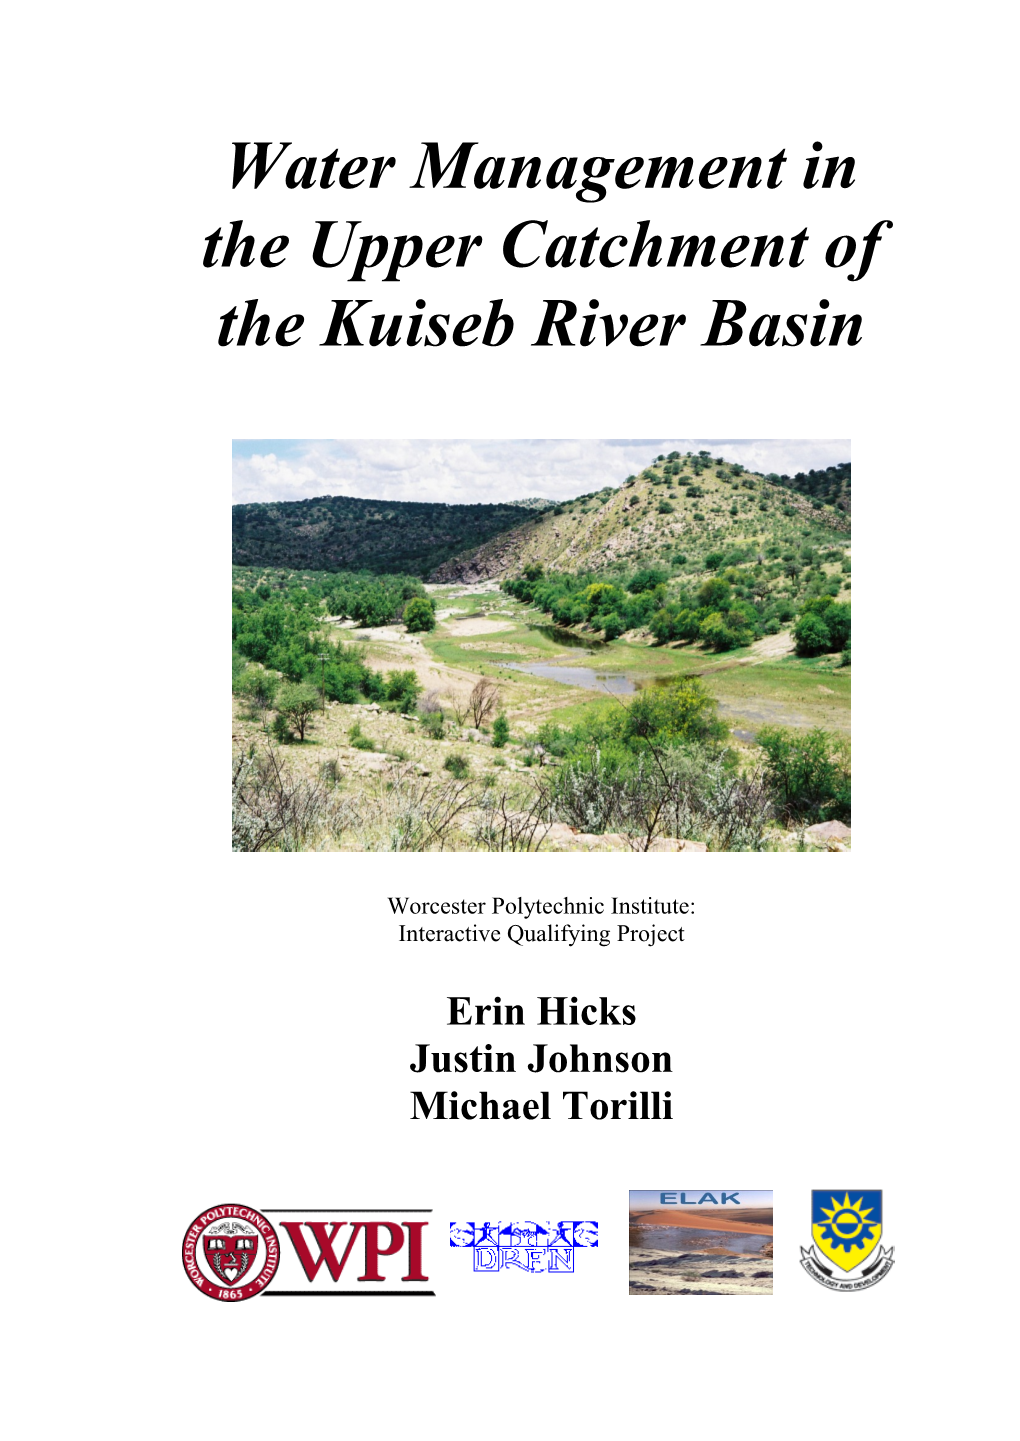 Water Management in the Upper Catchment of the Kuiseb River Basin